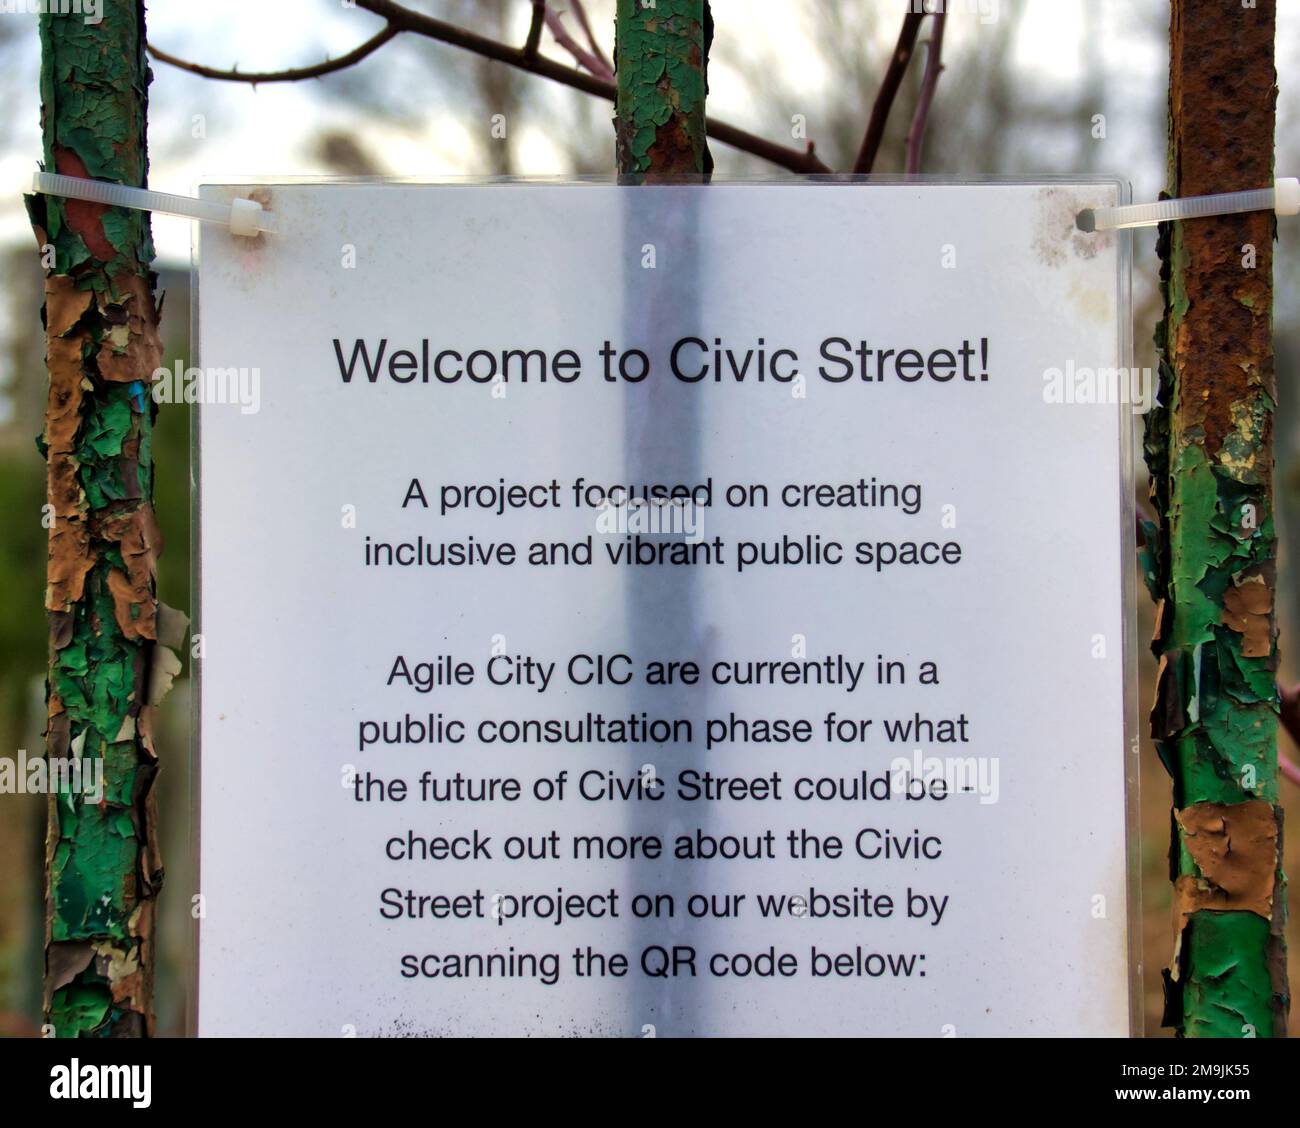 Welcome to civic street statement A project focused on creating inclusive and vibrant public space near the forth and cllde canal Stock Photo